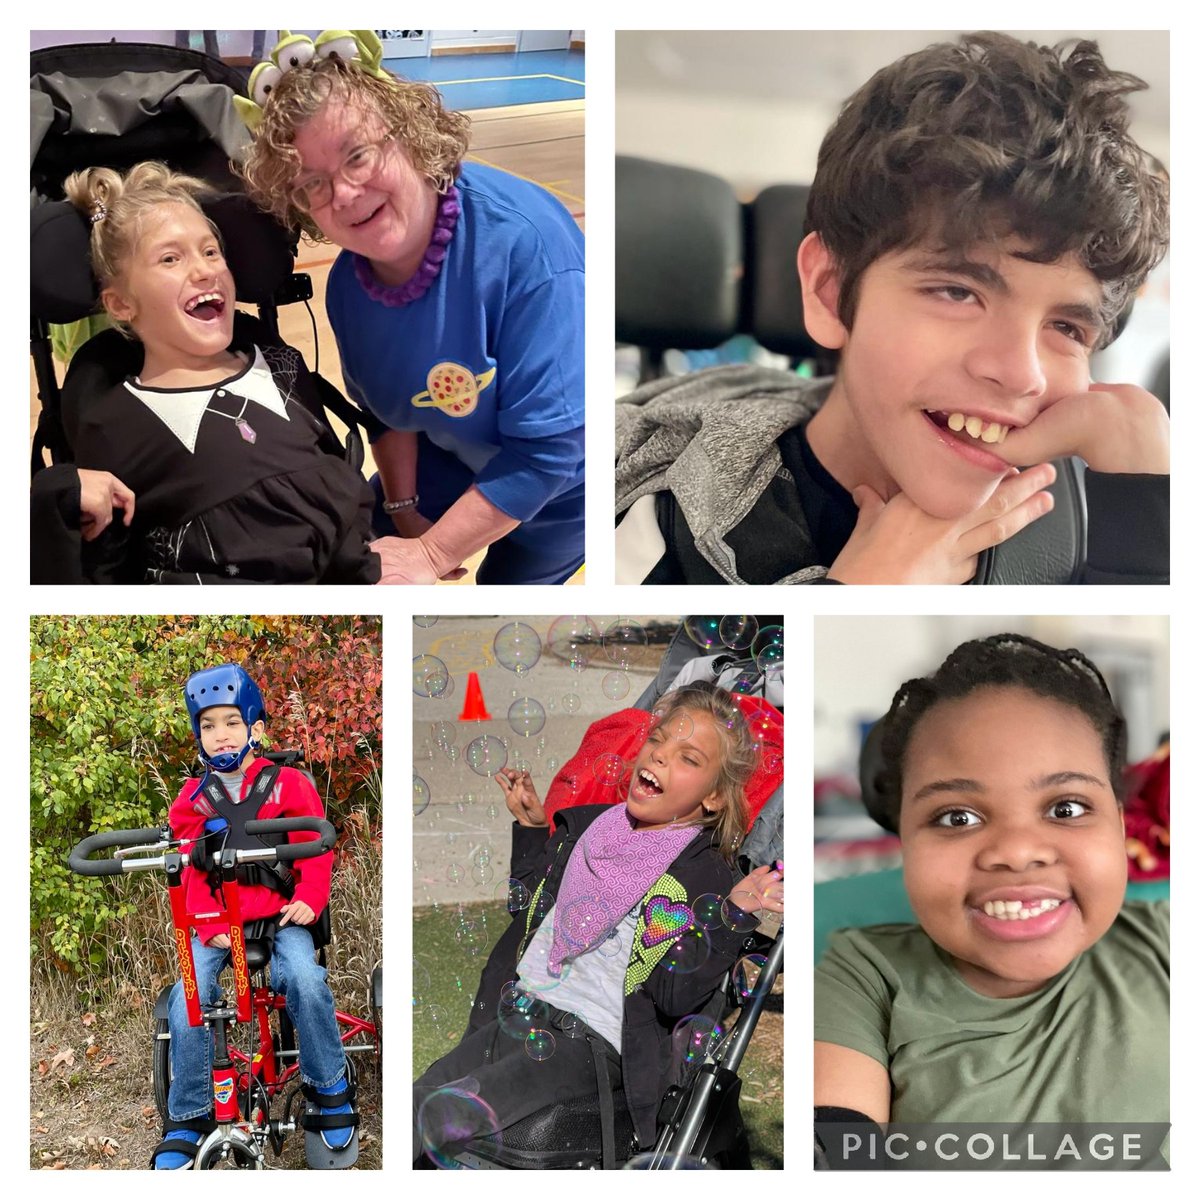 February 29 is Rare Disease Day. Today we raise awareness to remove barriers, promote equality and generate change for over 300 million adults and children worldwide living with a rare disease, their families and carers. Today we celebrate real life super heroes. @hcdsbSEAC